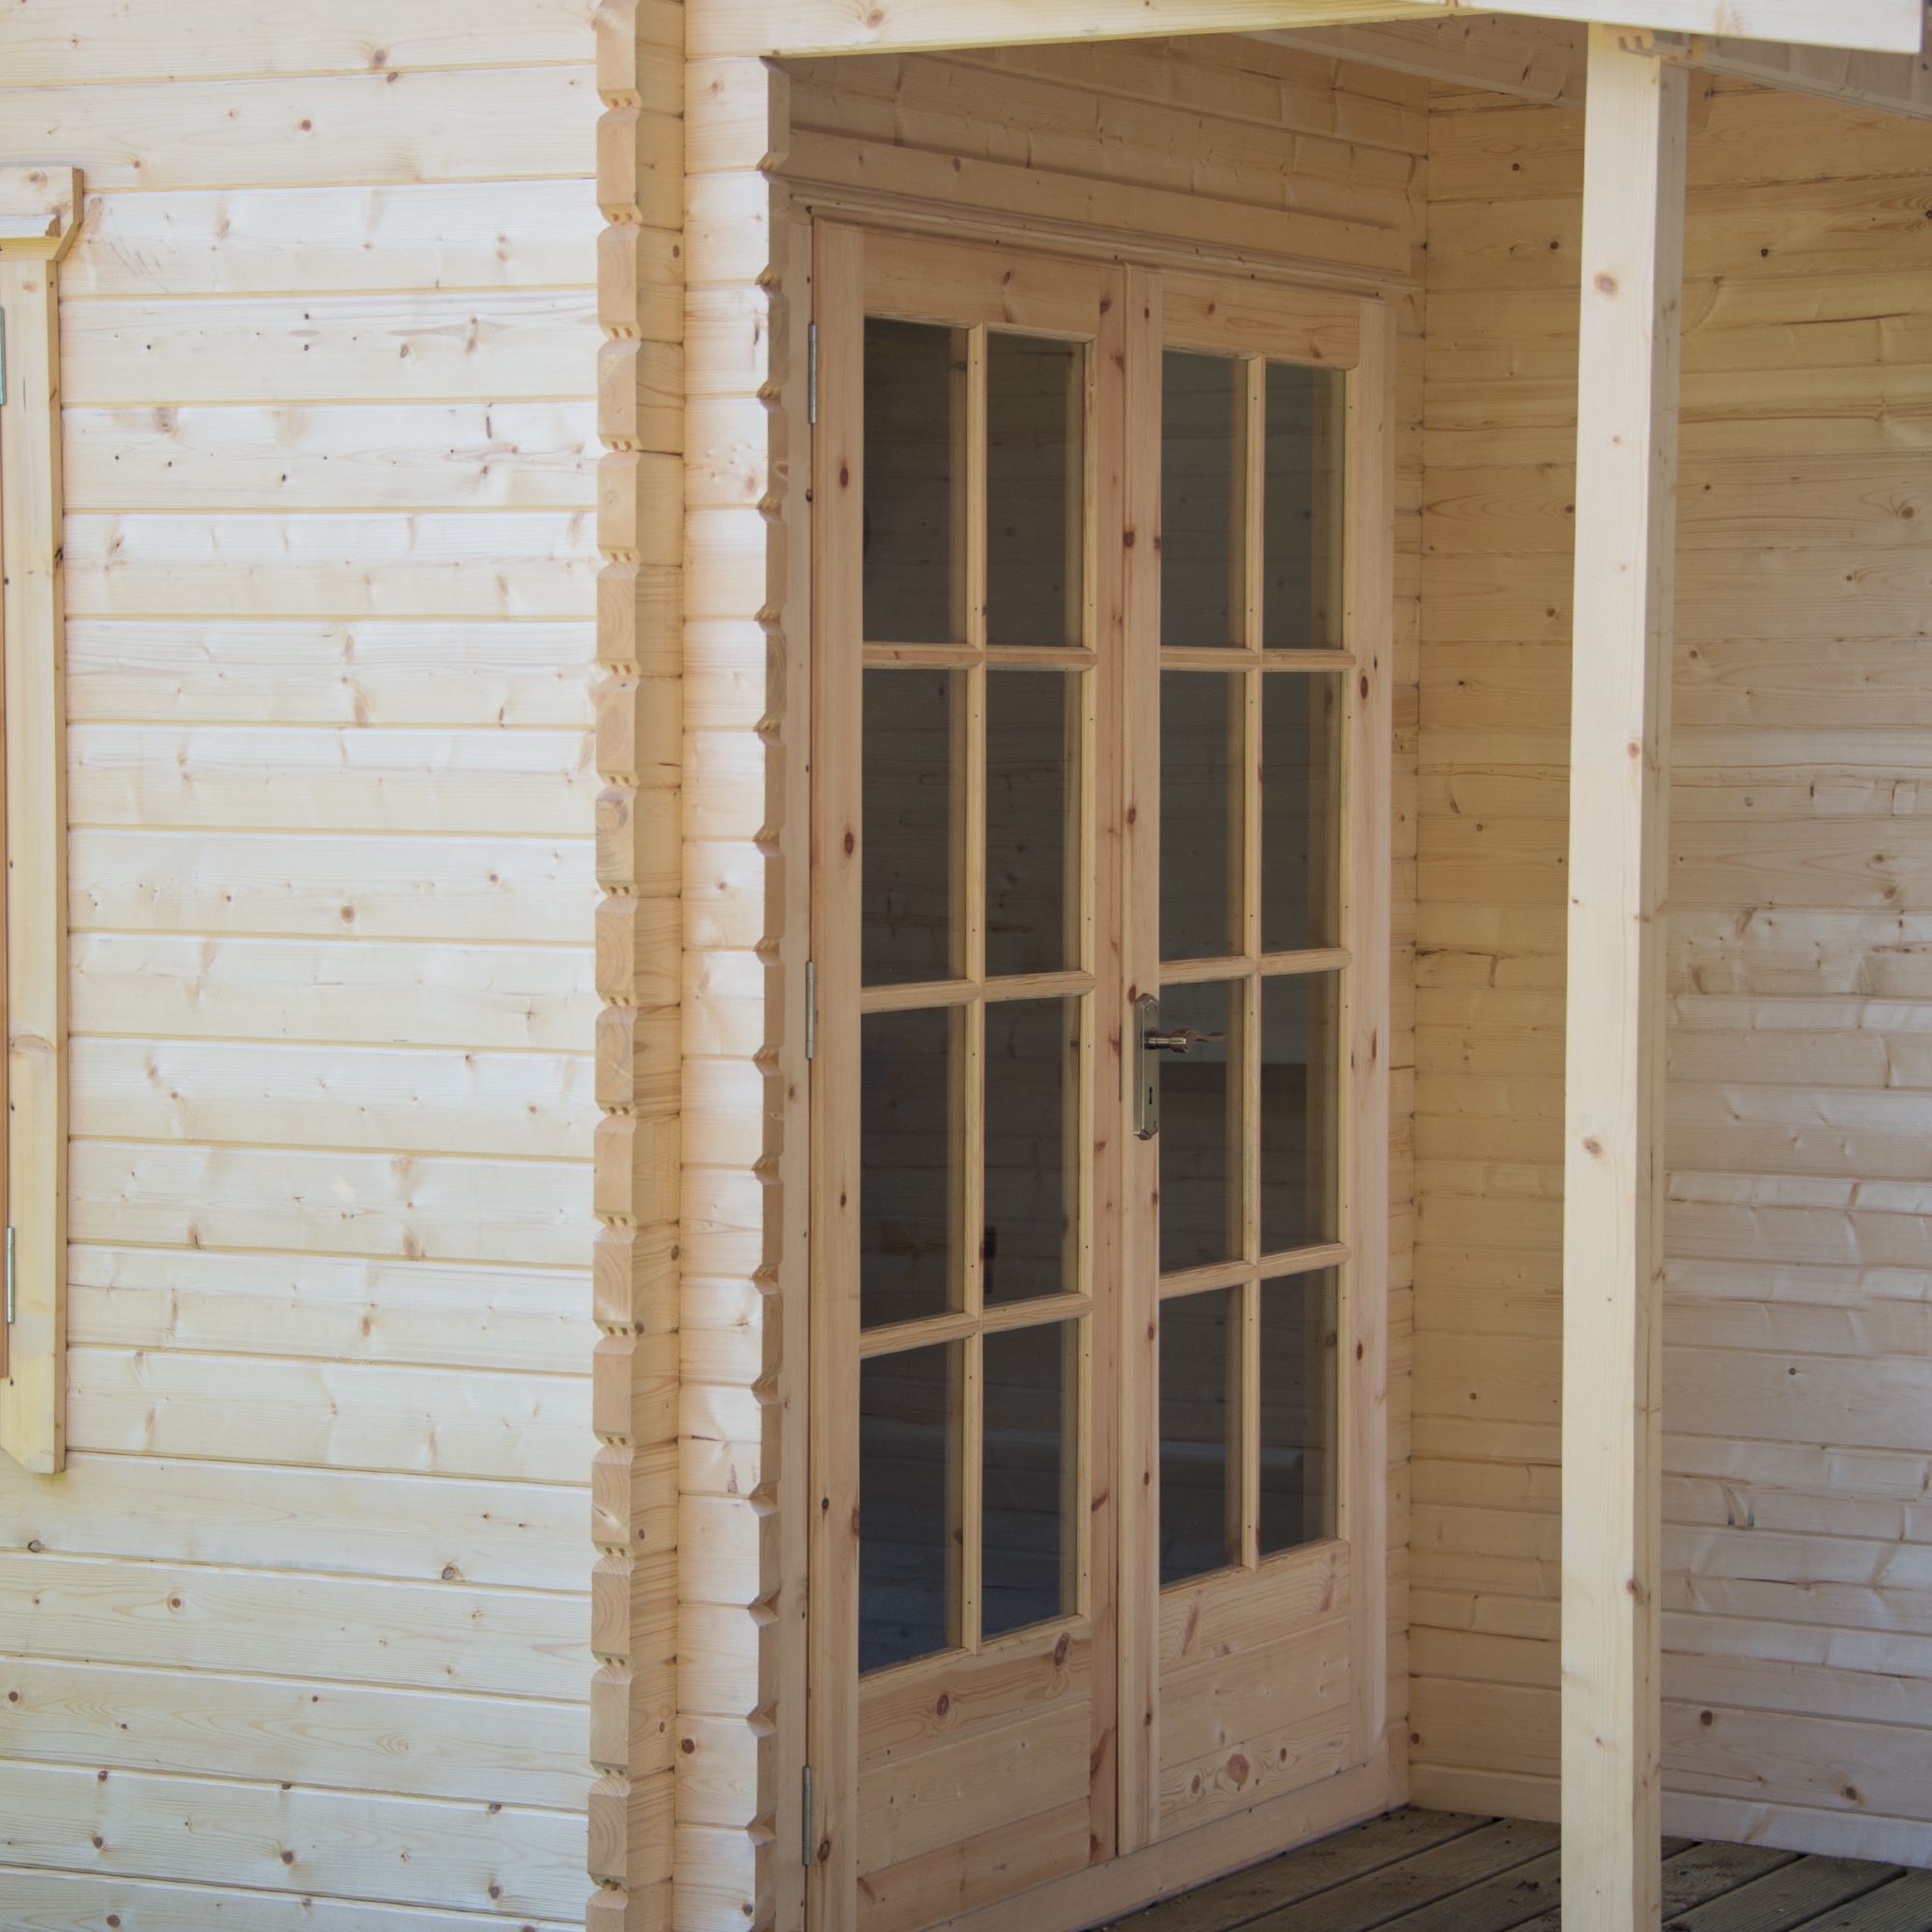 Shire Twyford 16x17 ft & 2 windows Apex Wooden Cabin with Felt tile roof - Assembly service included